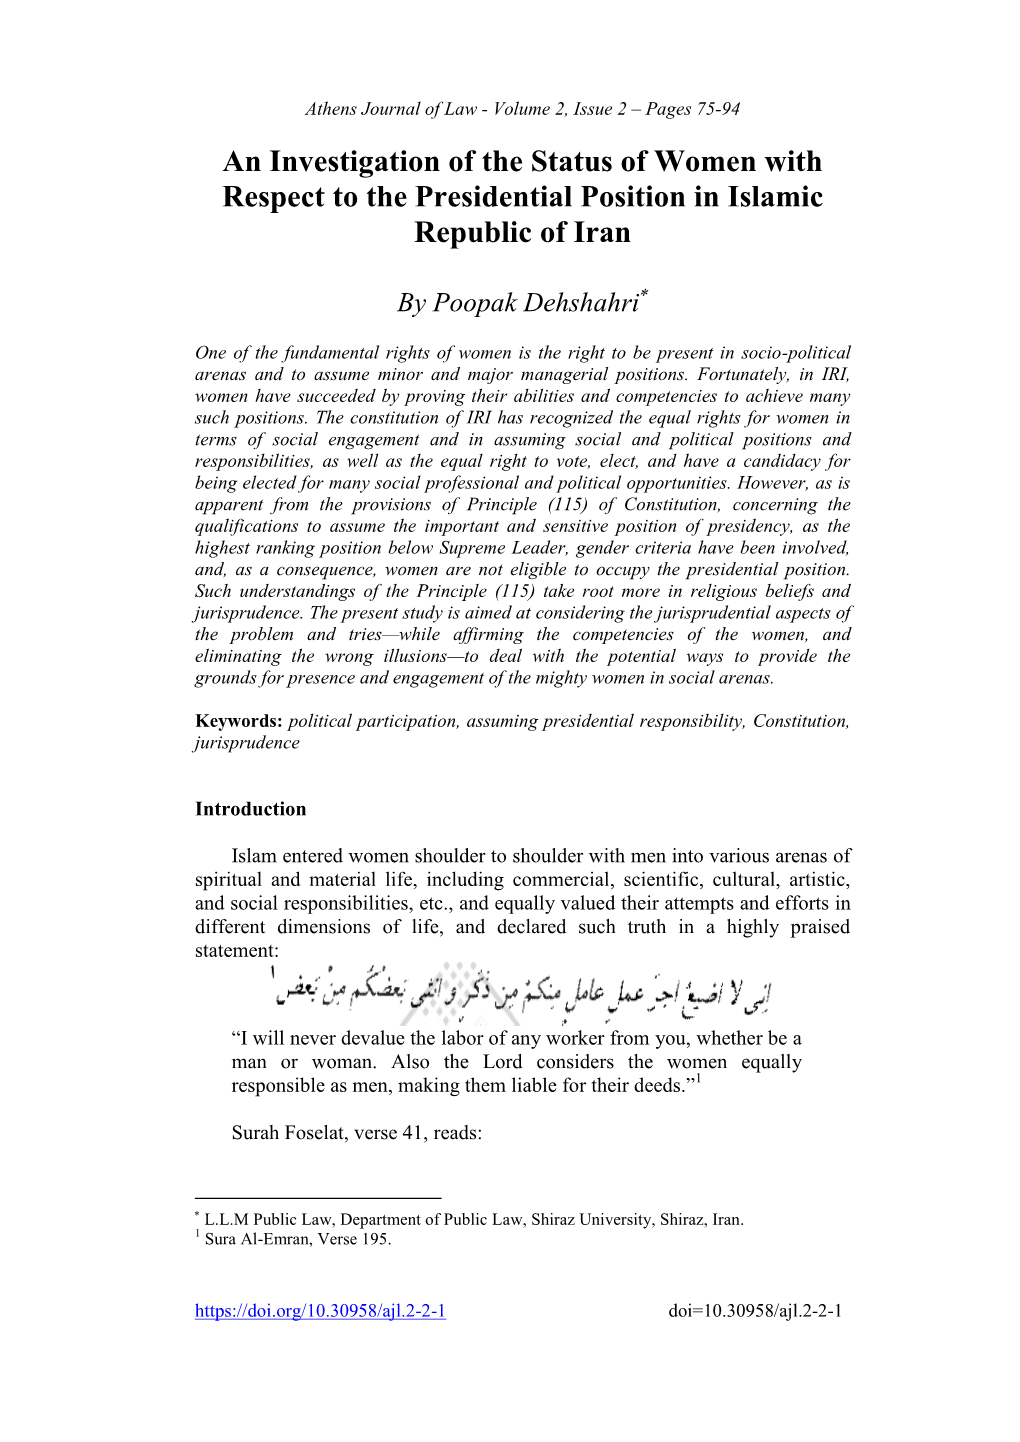 An Investigation of the Status of Women with Respect to the Presidential Position in Islamic Republic of Iran